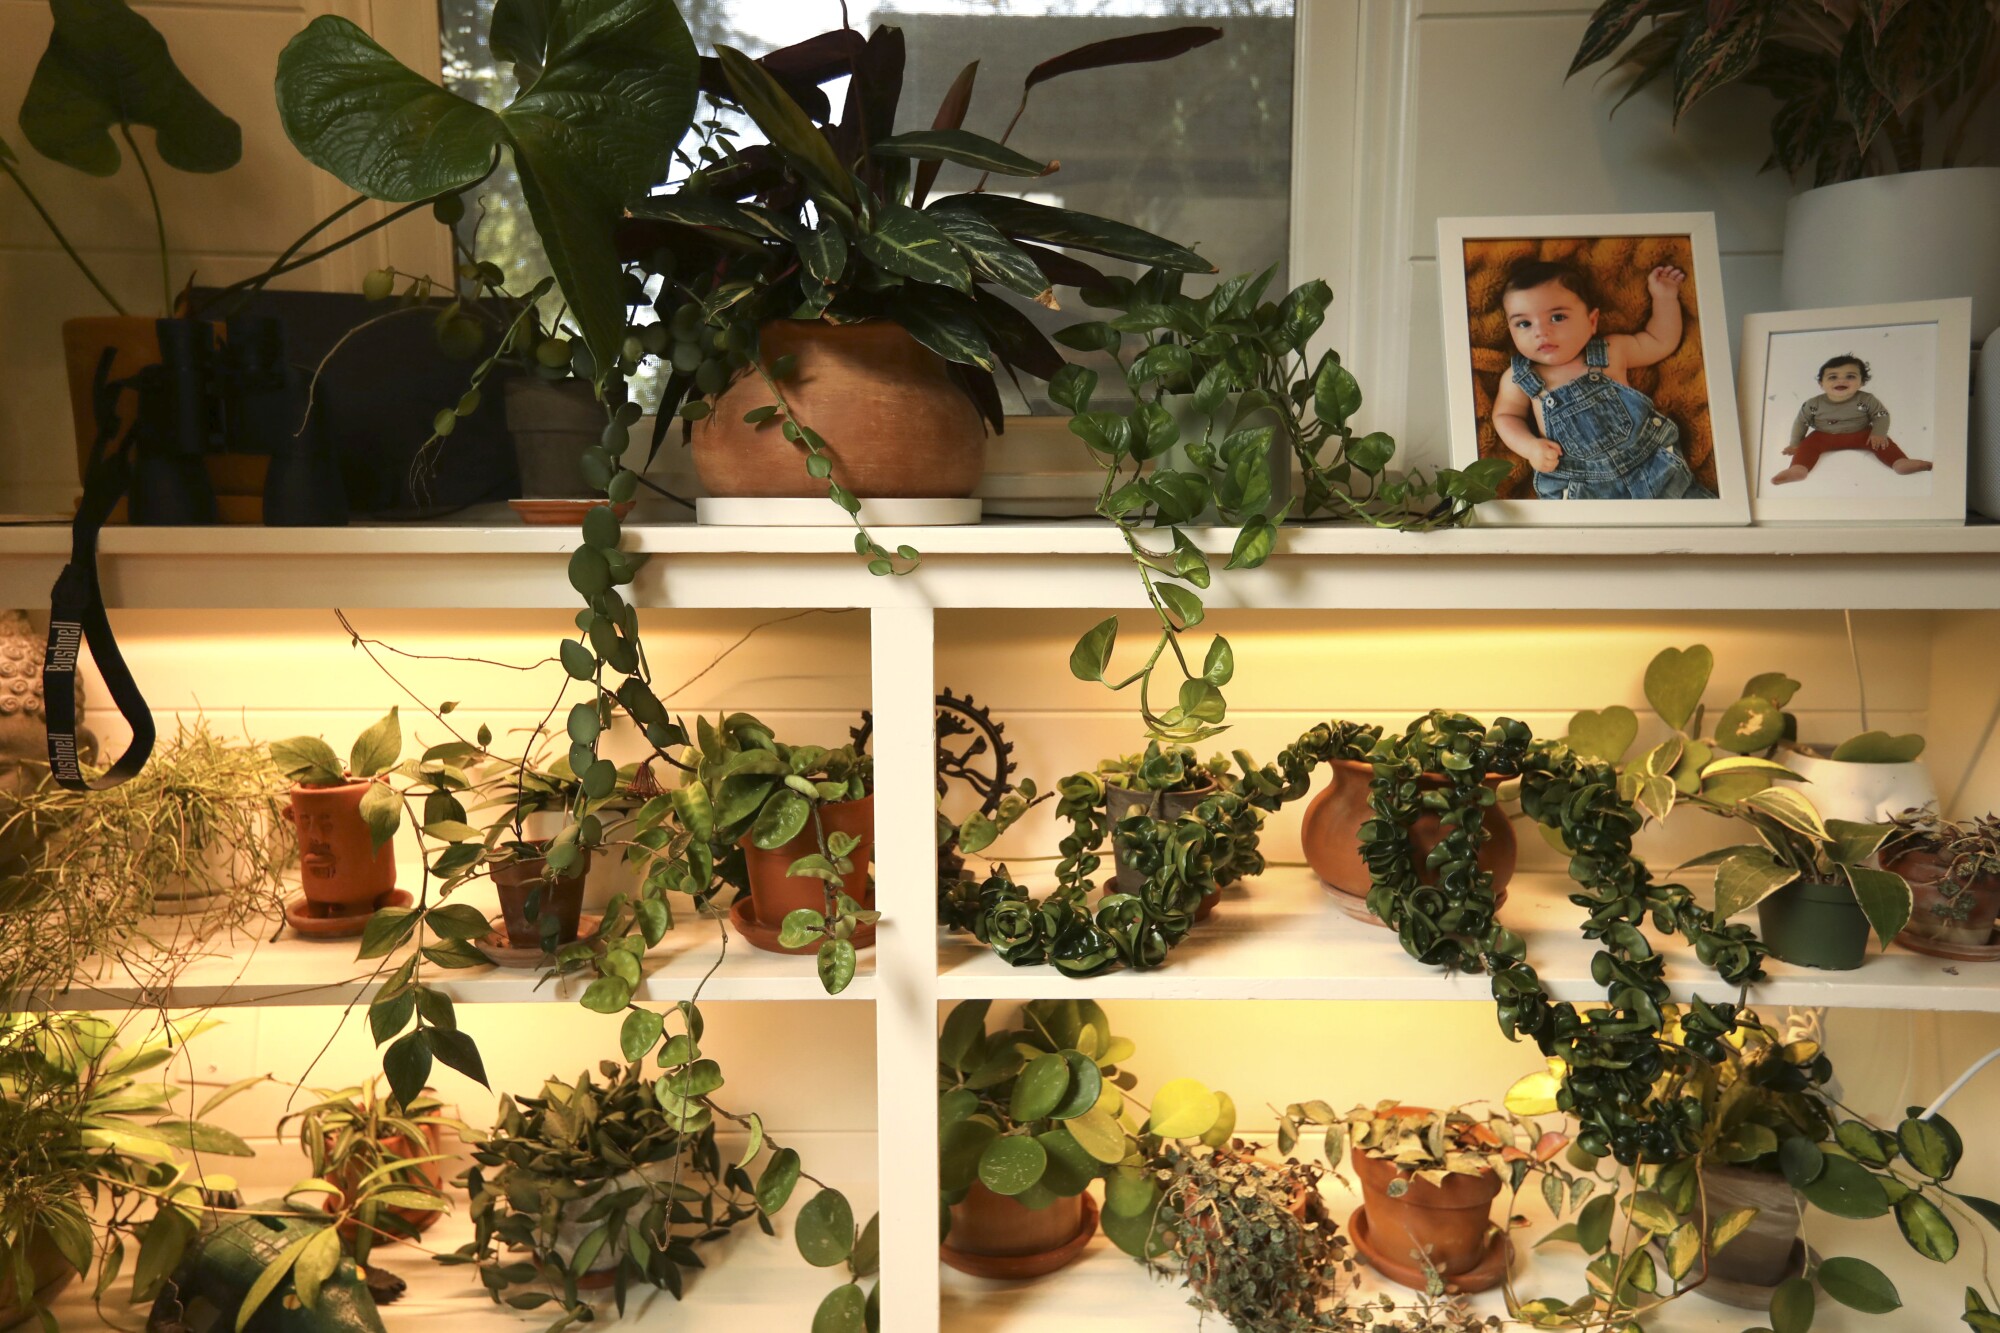 The Bazik family home's shelves, lined with plants and family pictures.